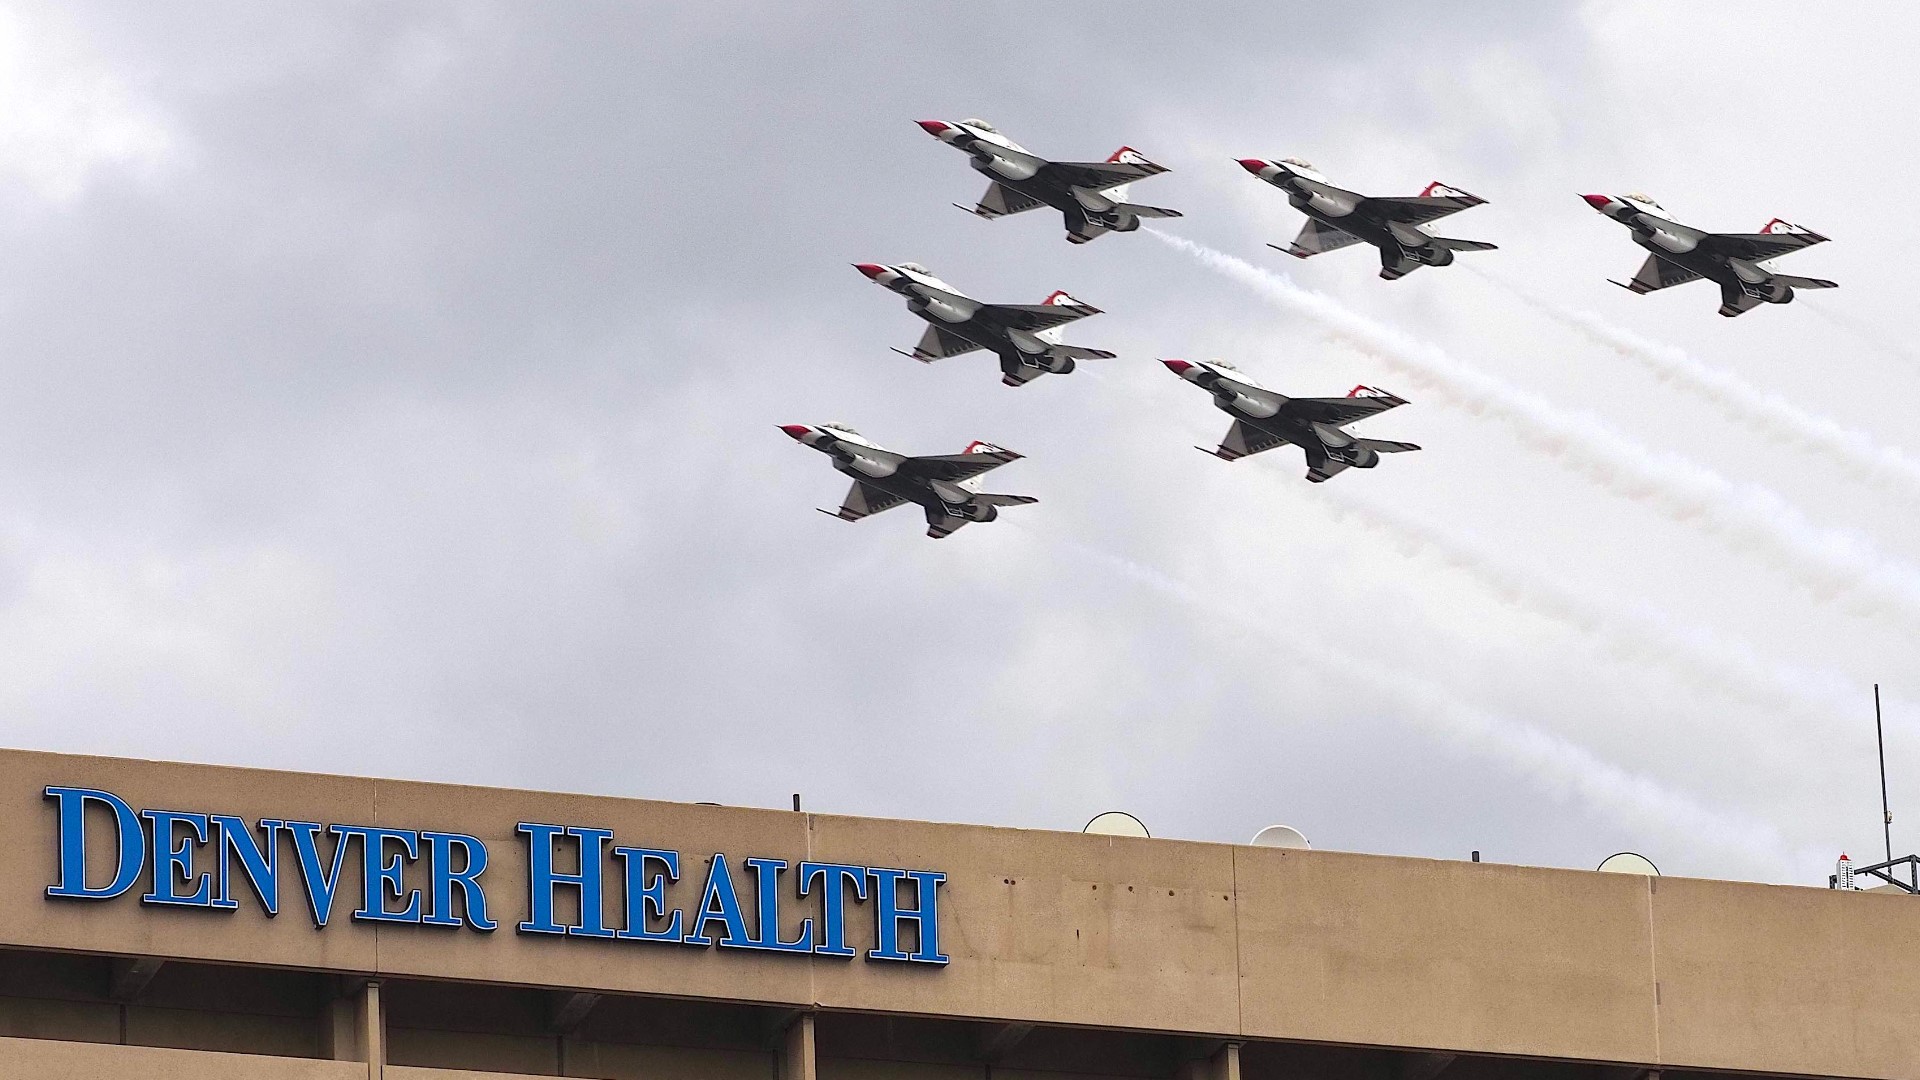 The F-16s of the USAF Thunderbirds performed a flyover in Colorado to honor front line COVID-19 workers. Sky9 caught a portion of their flyover in the Denver area.